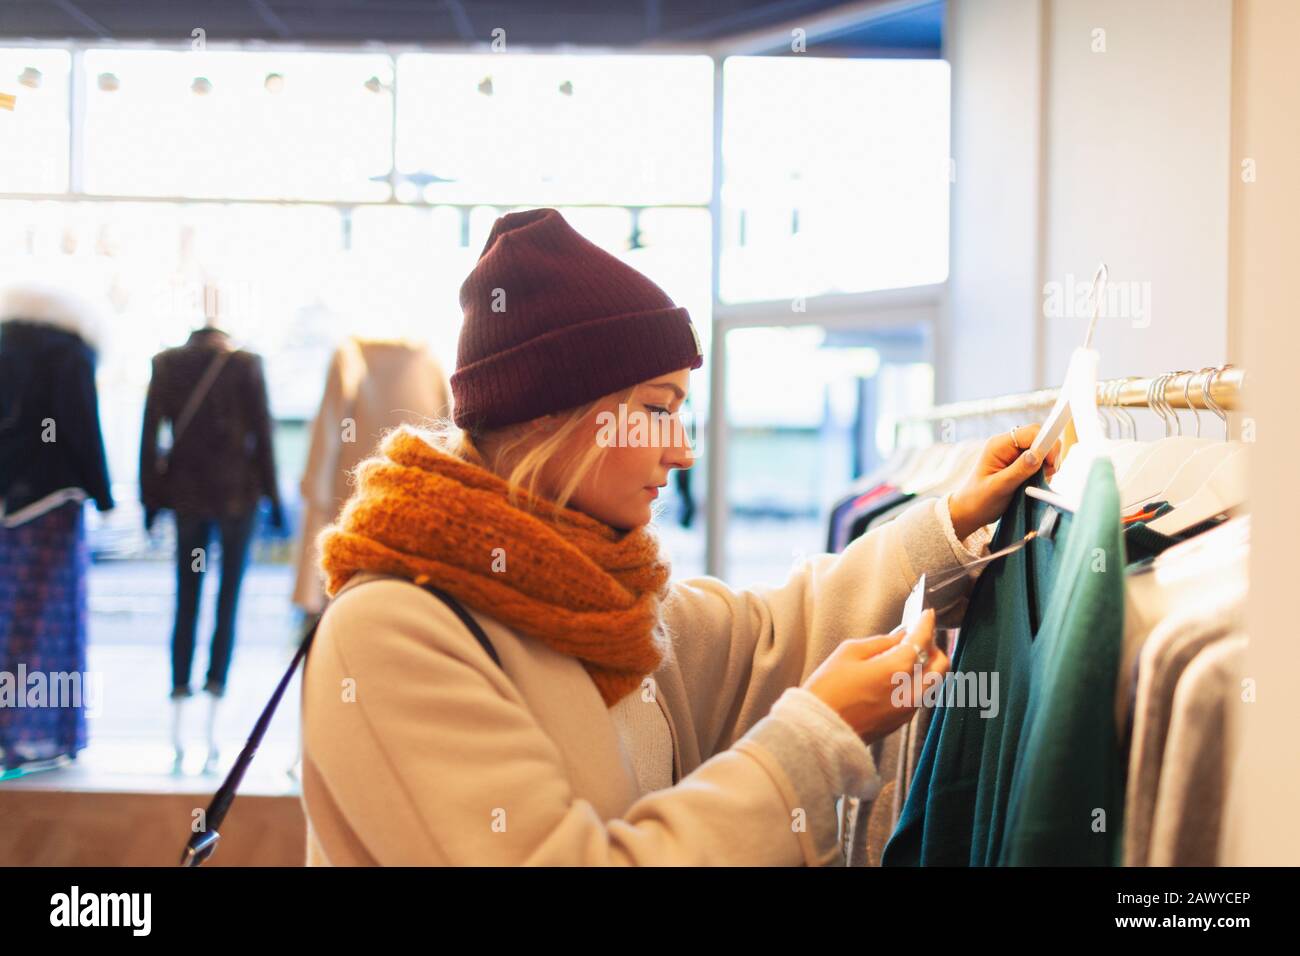 Young woman shopping in clothing store, checking price tag Stock Photo